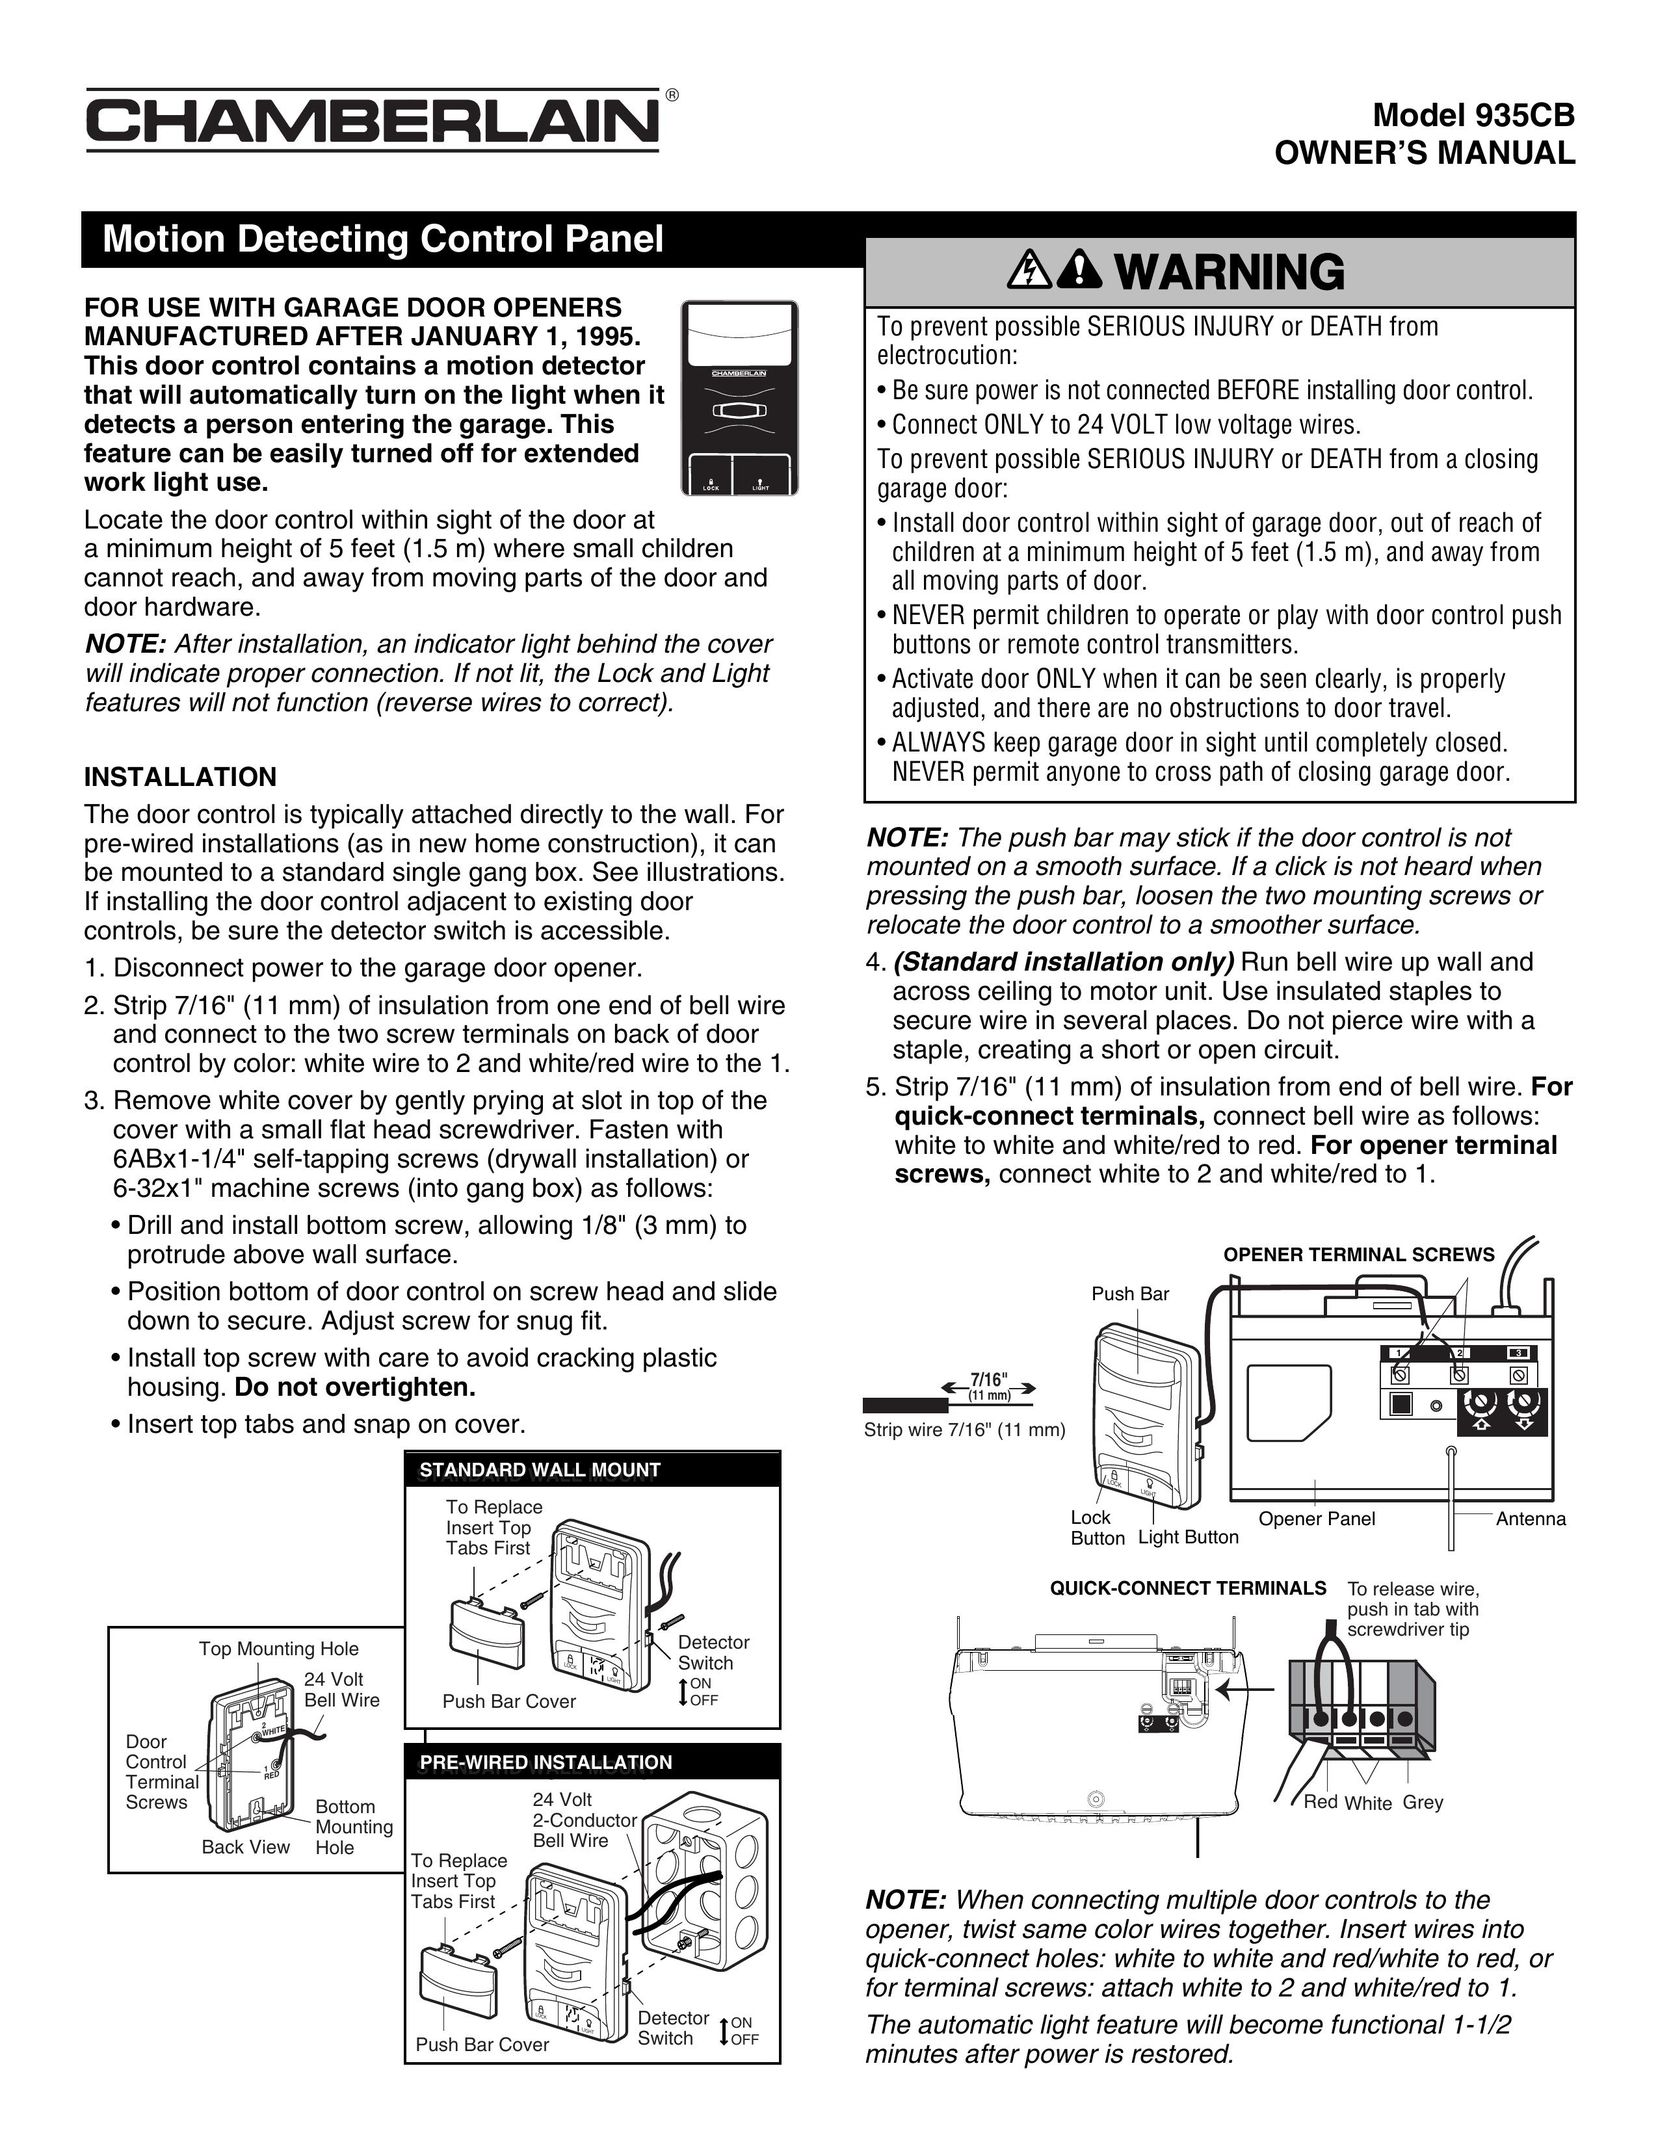 Chamberlain 935CB Home Security System User Manual